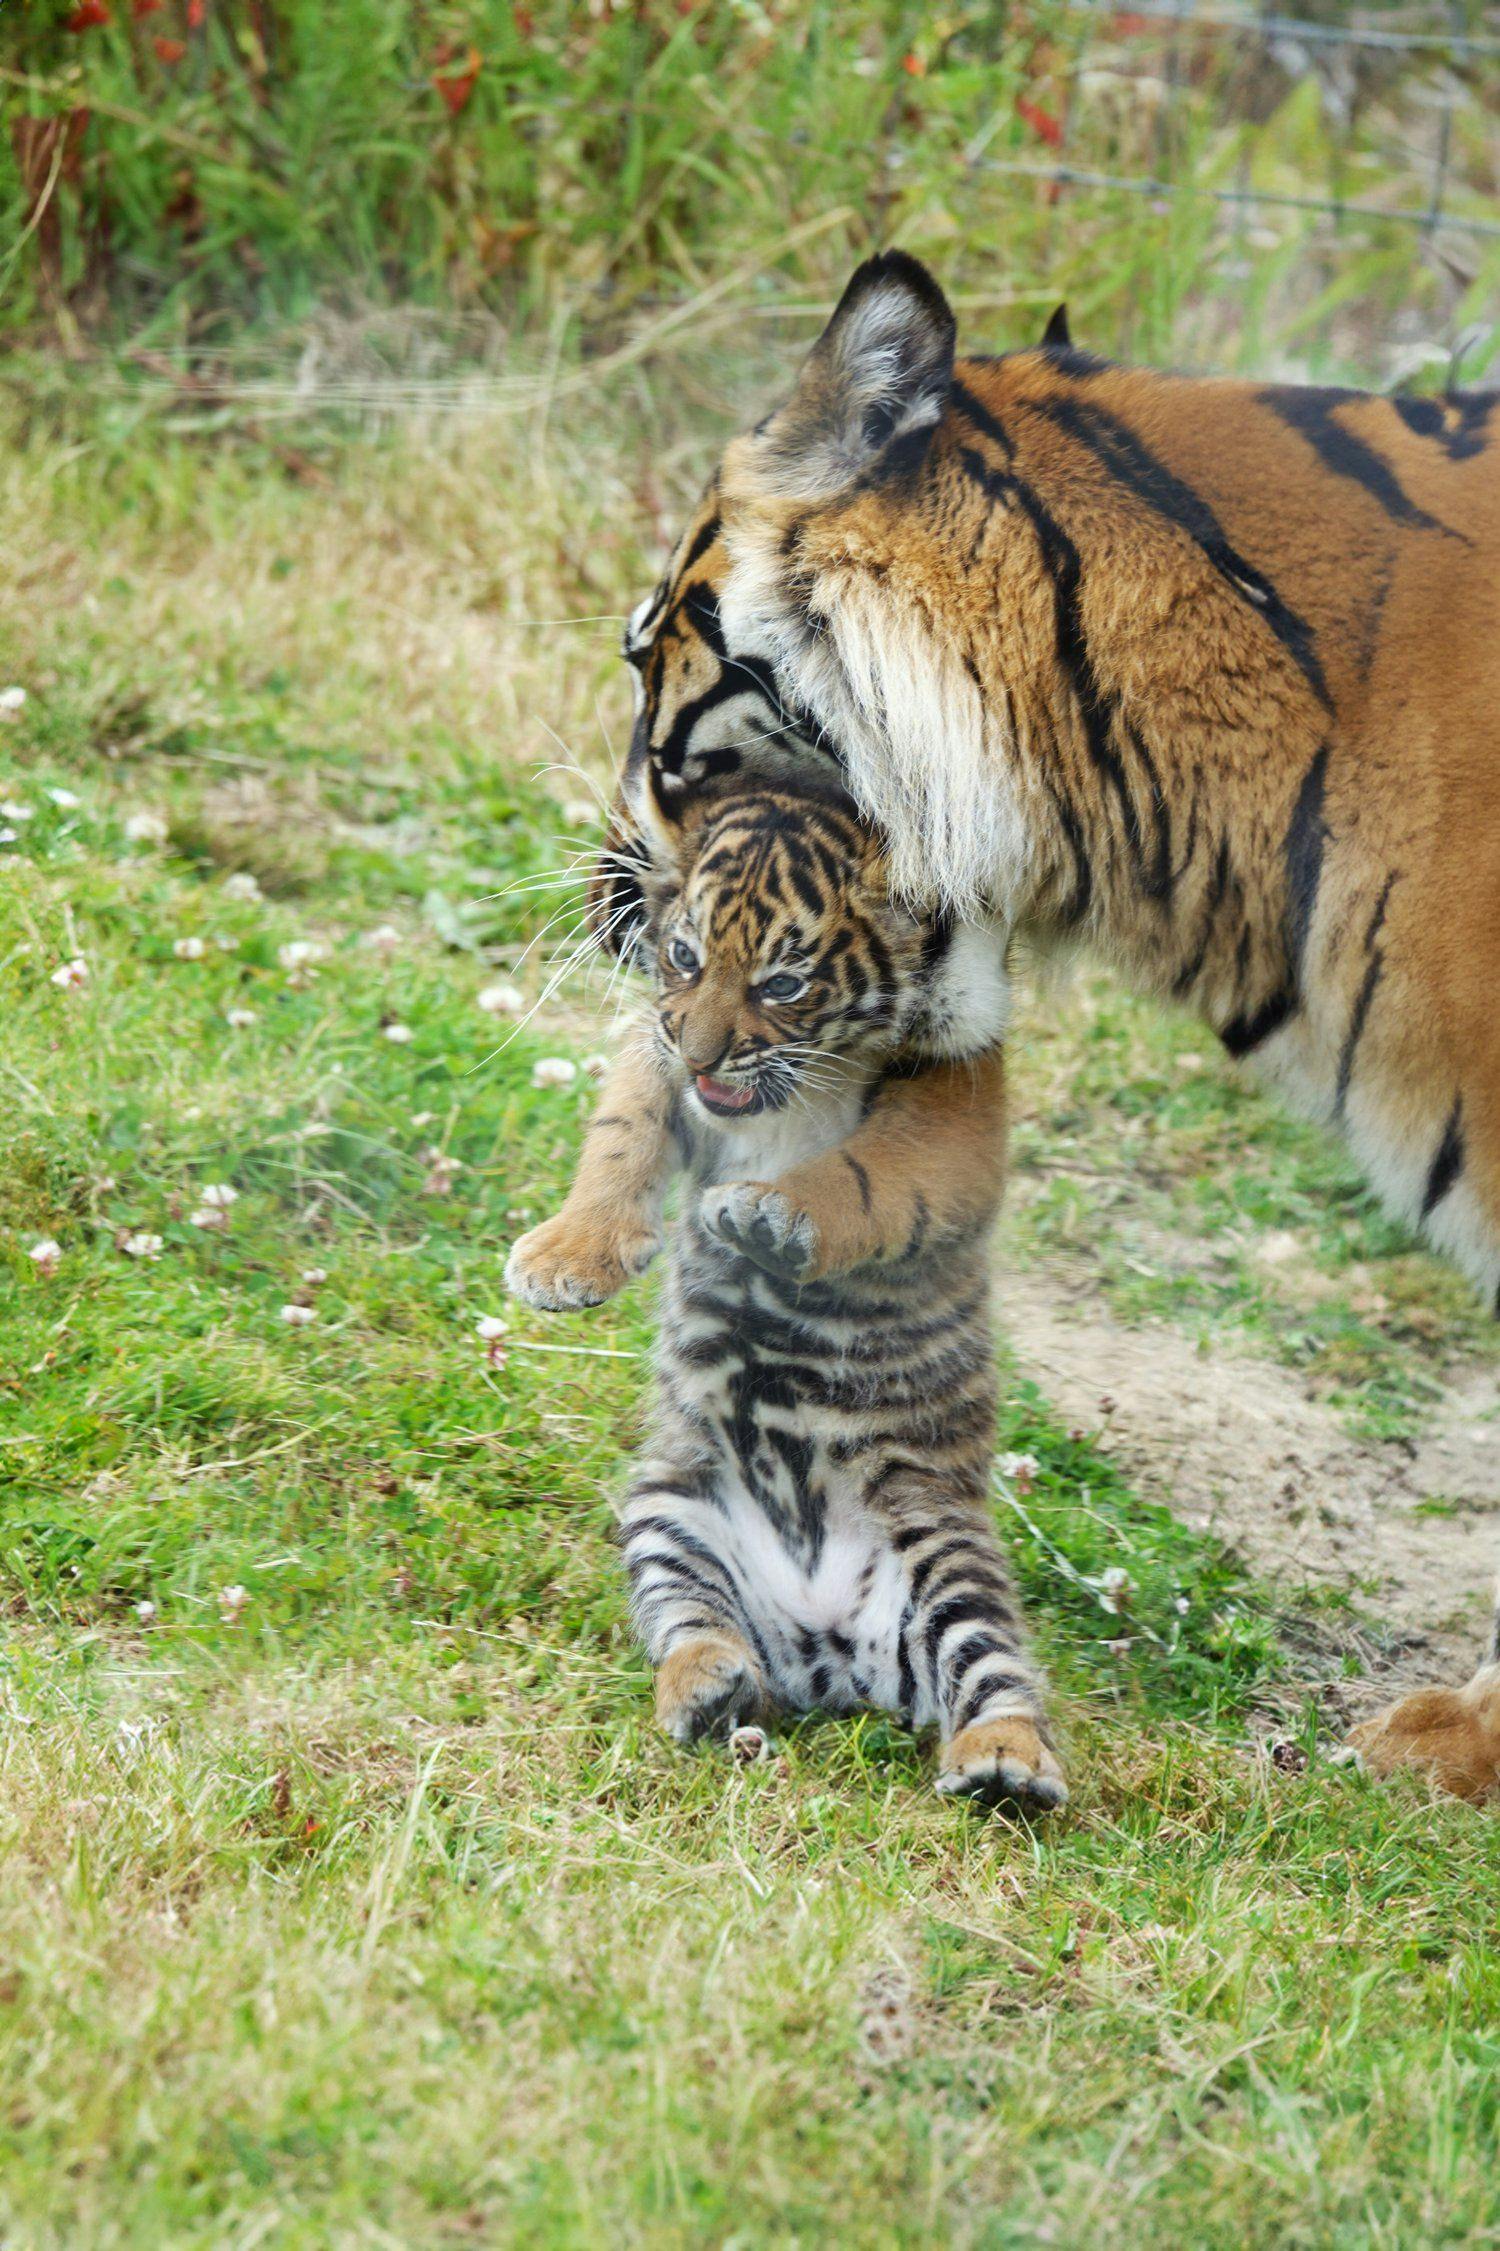 Birth of Sumatran tiger is a boost to critically endangered subspecies